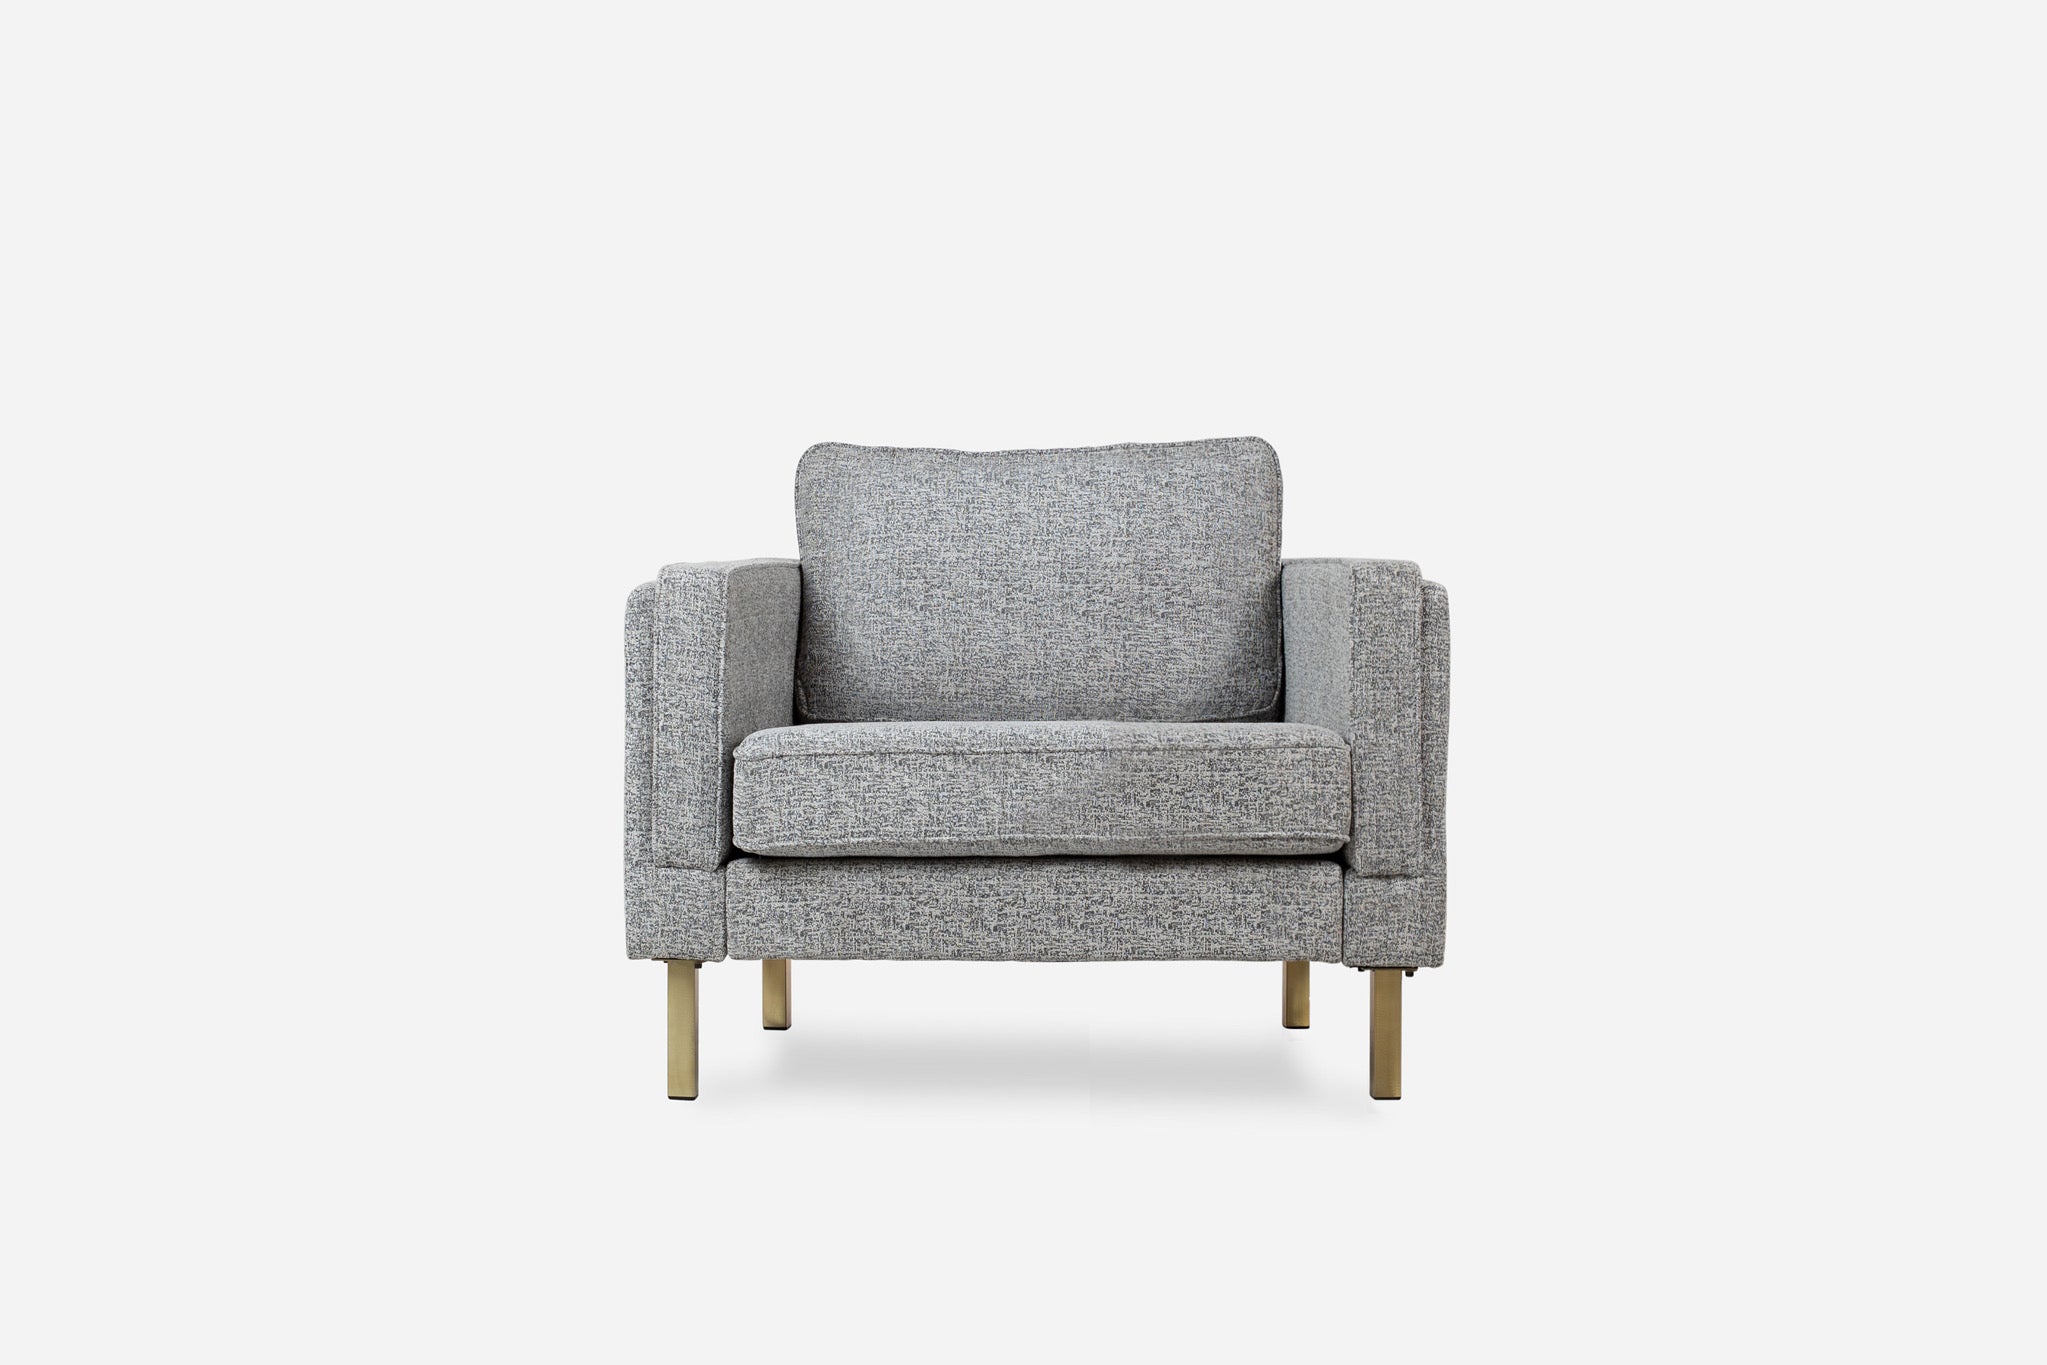 albany armchair shown in grey fabric with gold legs